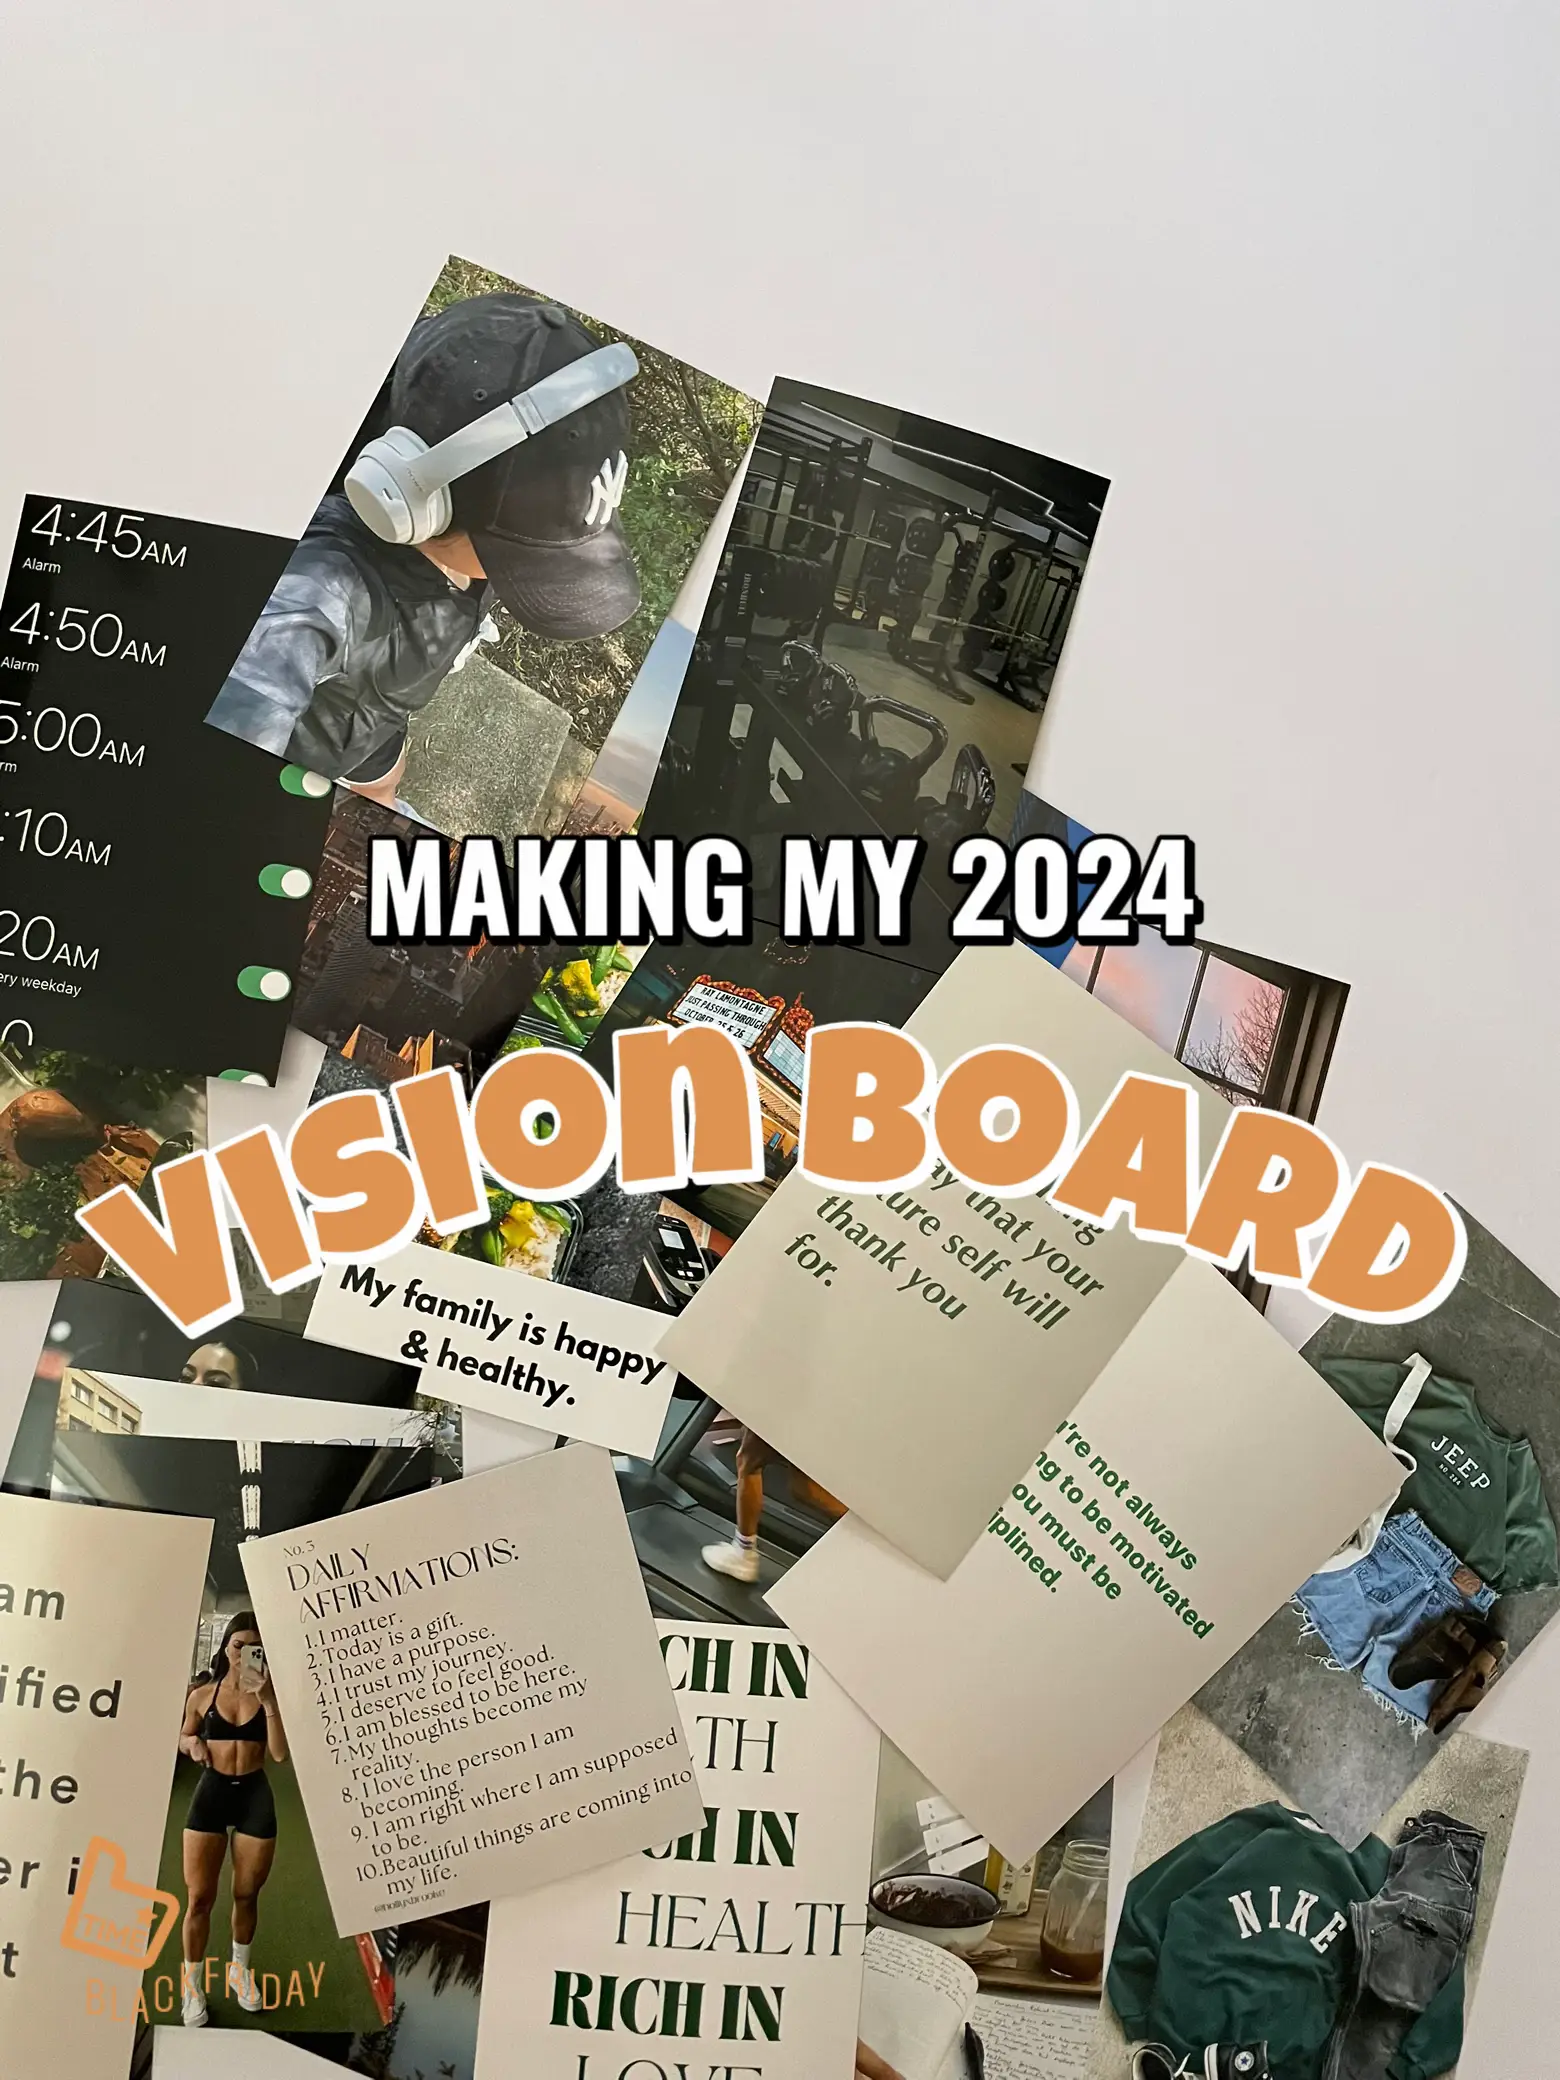 Vision Board Clip Art Book: Design Your Dream Life and Achieve Your Goals  With Inspiring Pictures, Quotes, Words, Affirmations, and Much More for Men   Board Supplies & Vision Board Magazines) by